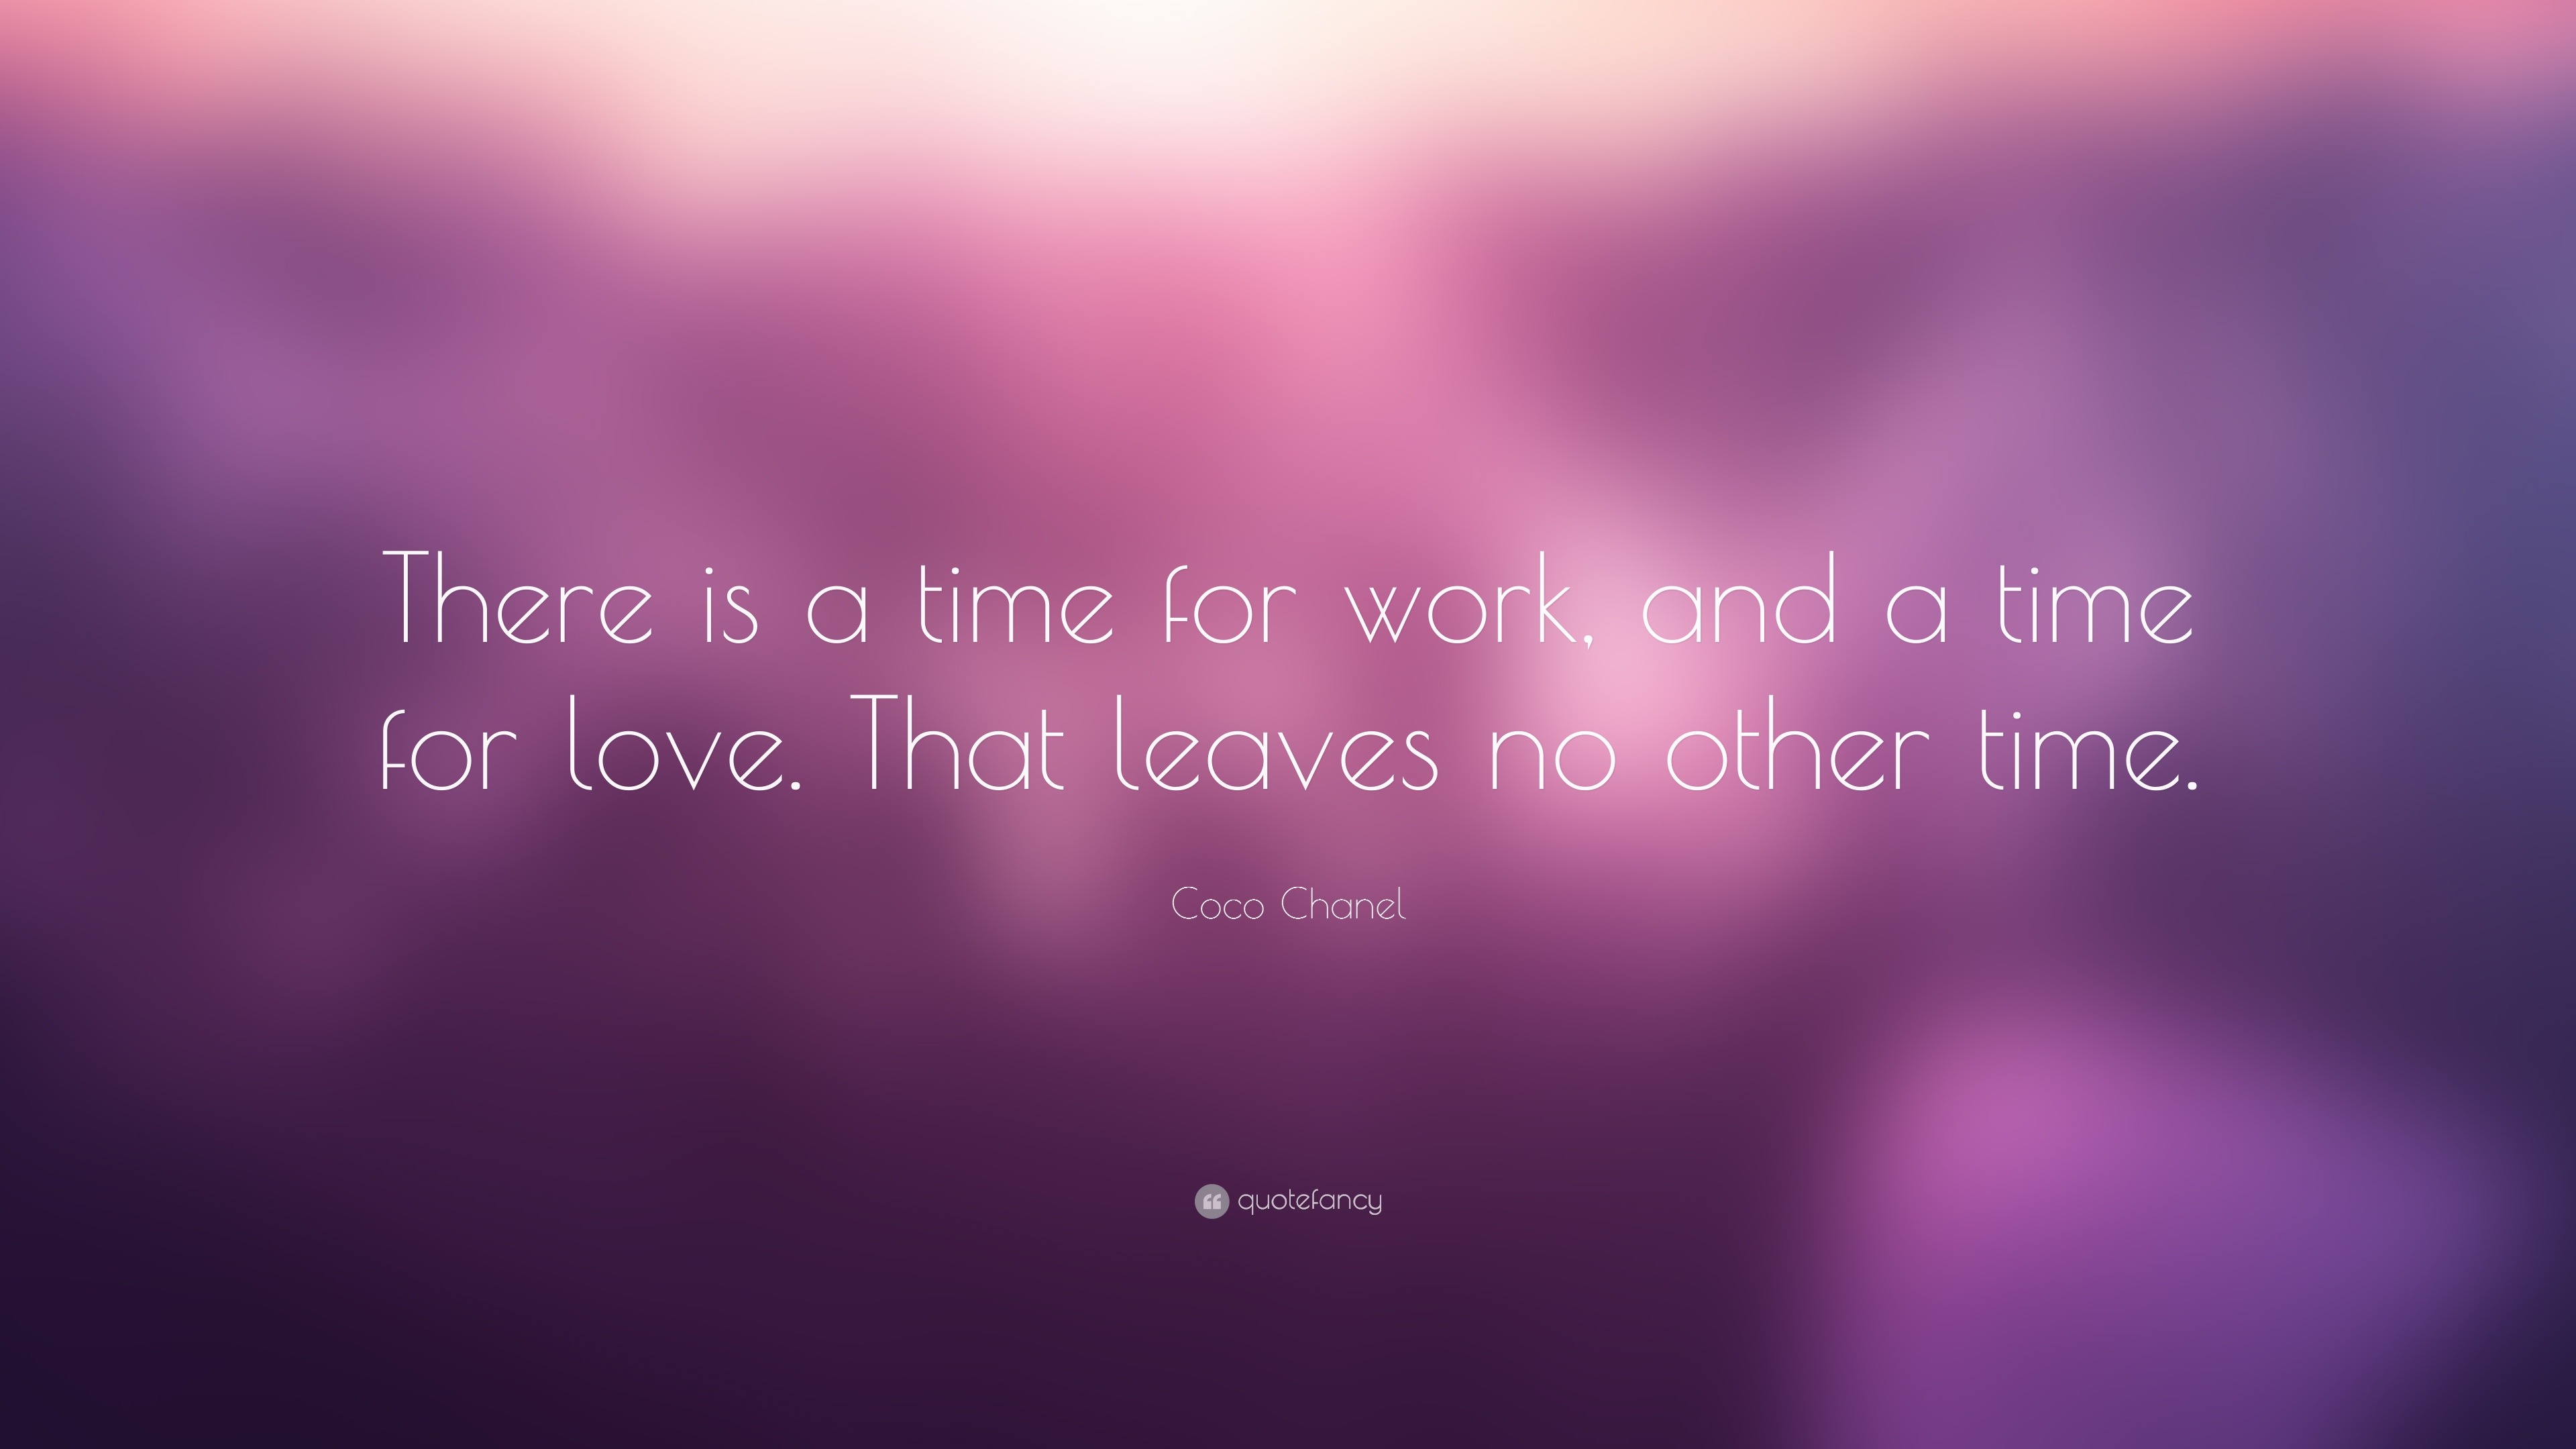 Coco Chanel Quote “There is a time for work and a time for